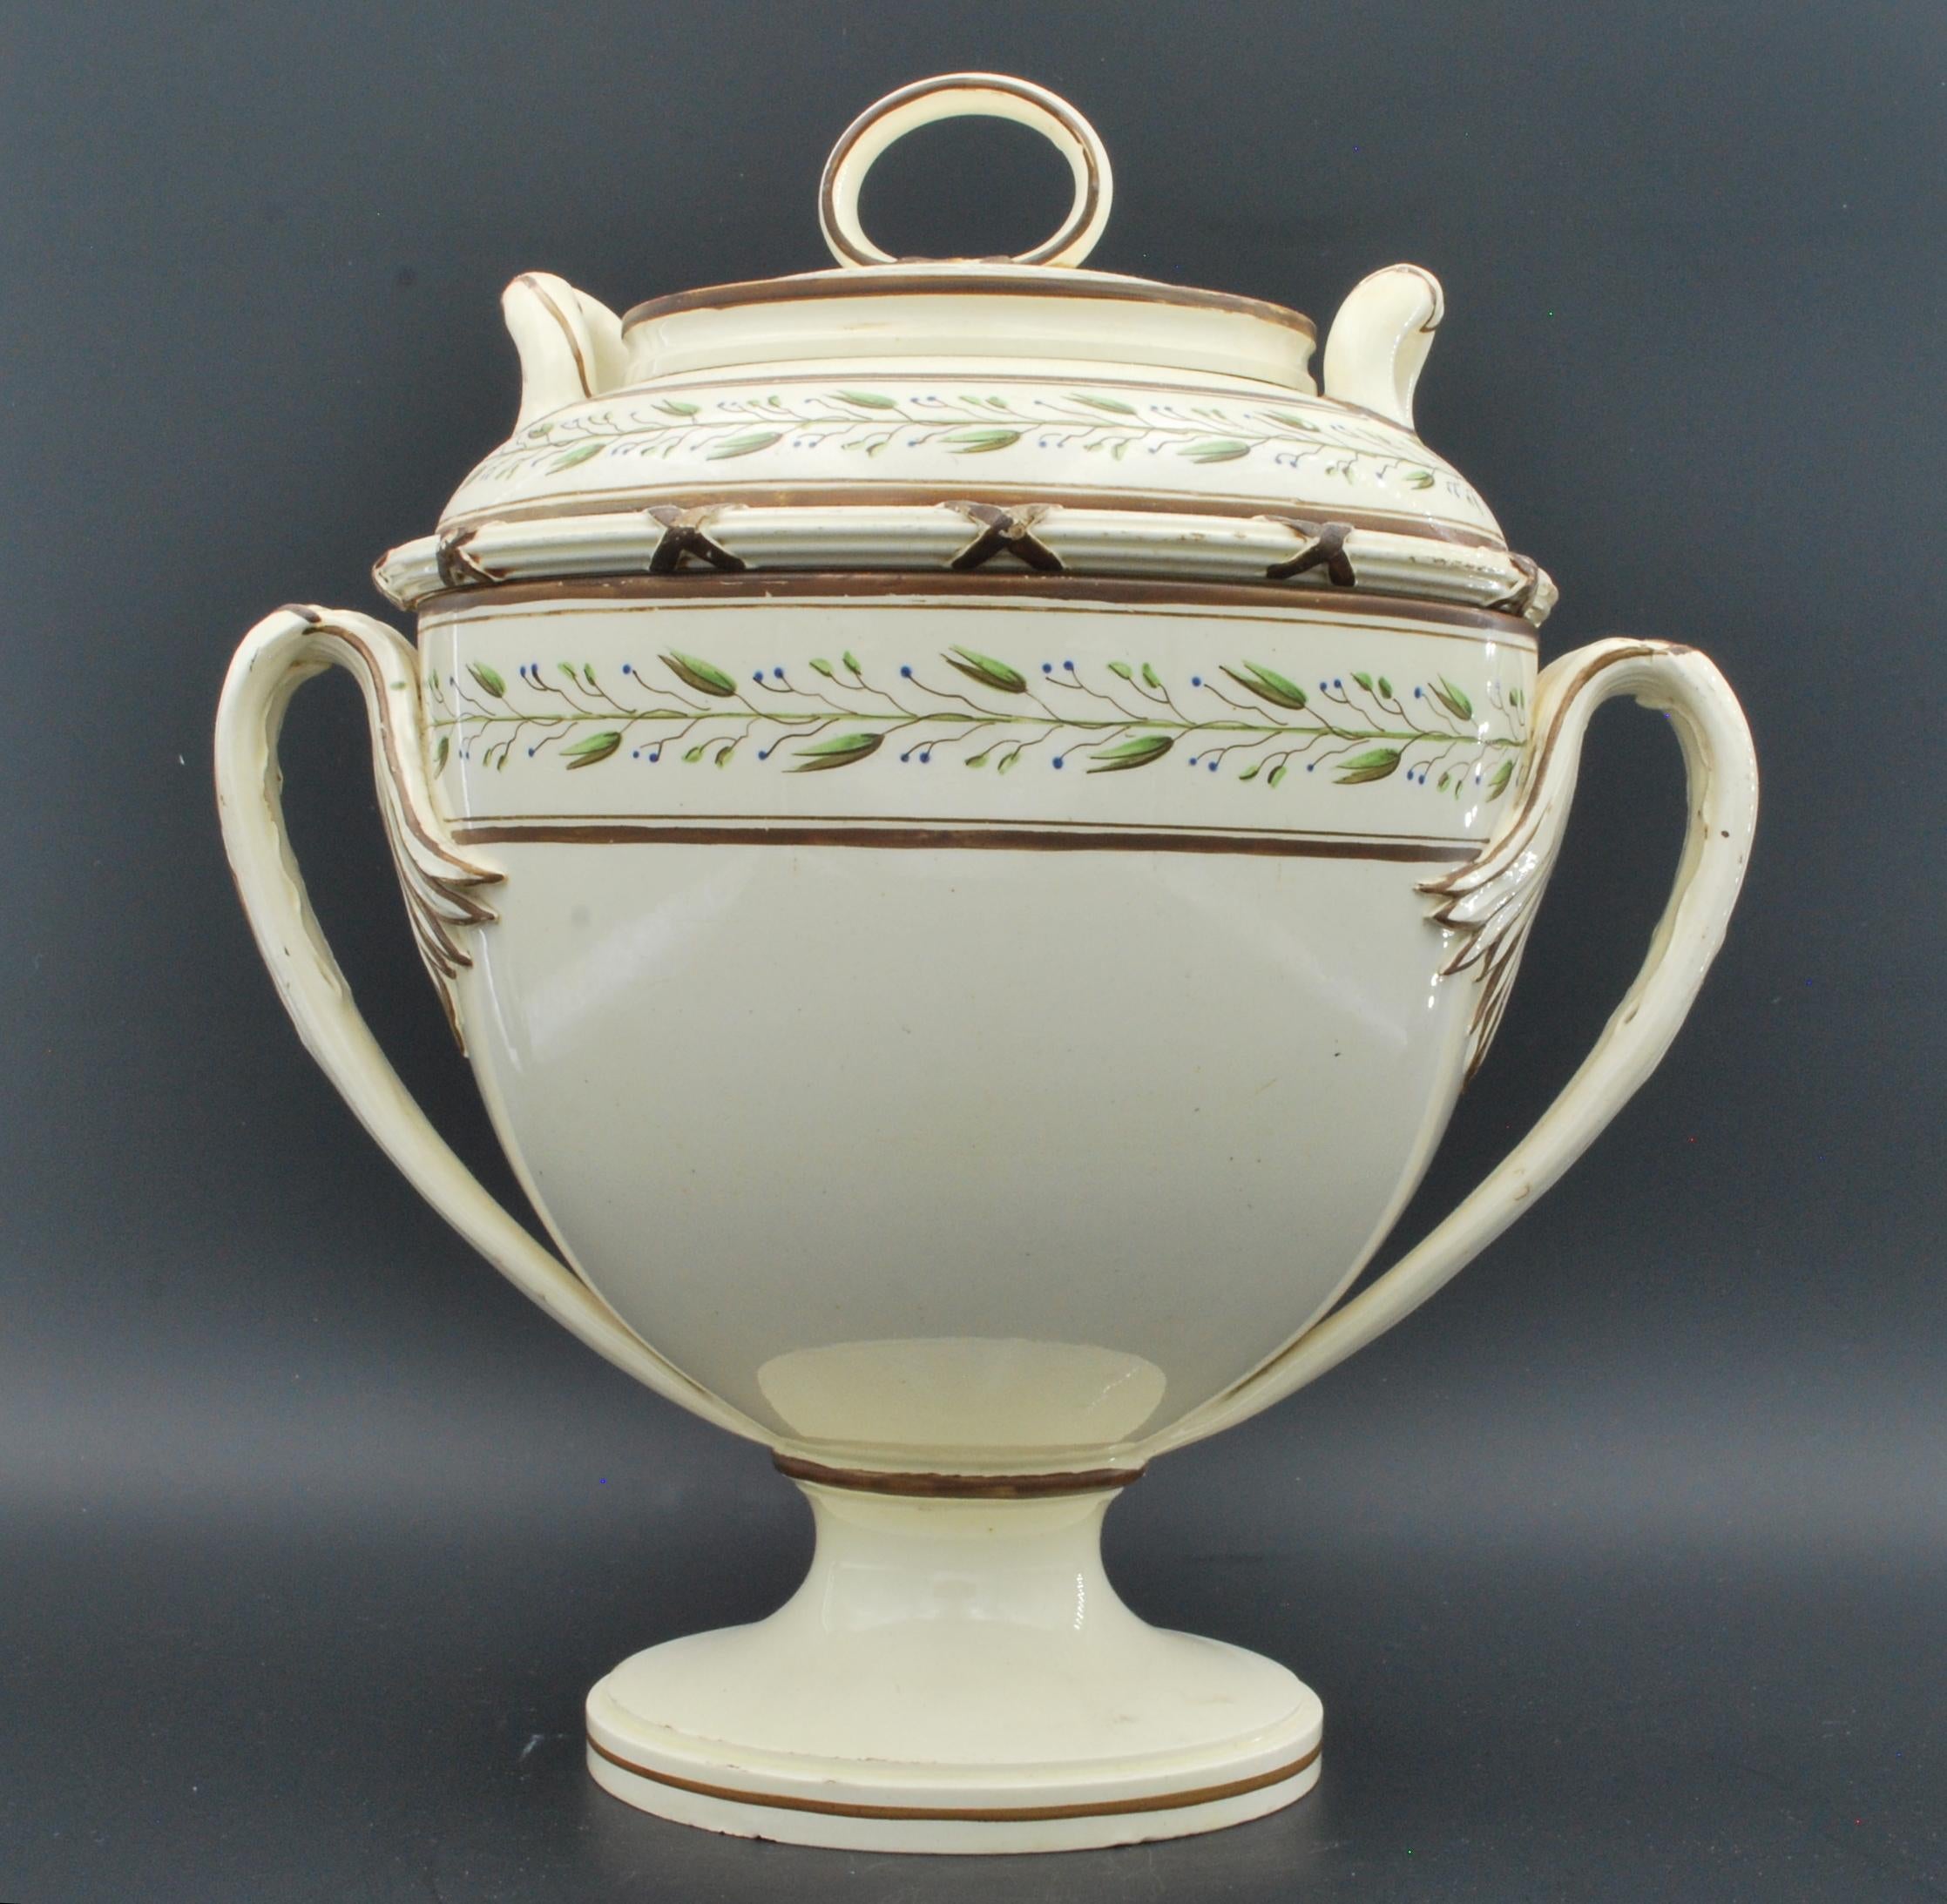 An important four-piece glacier, or fruit cooler, in creamware with freehand painted decoration. Ice was put into the upper and lower sections to keep the contents cool.